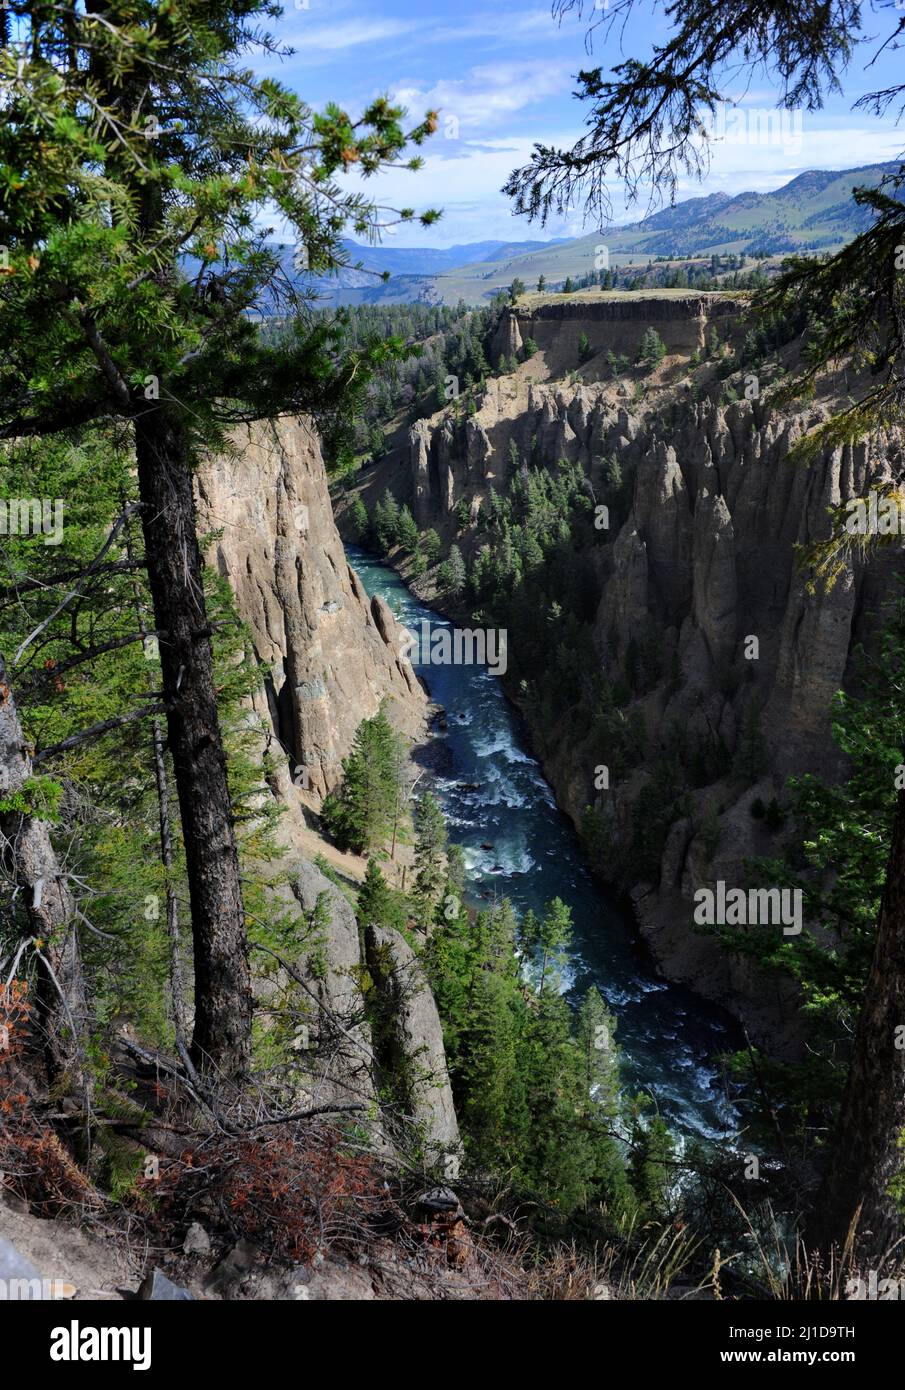 Tower Creek converges on the Yellowstone River in this canyon area of Yellowstone National Park. Stock Photo